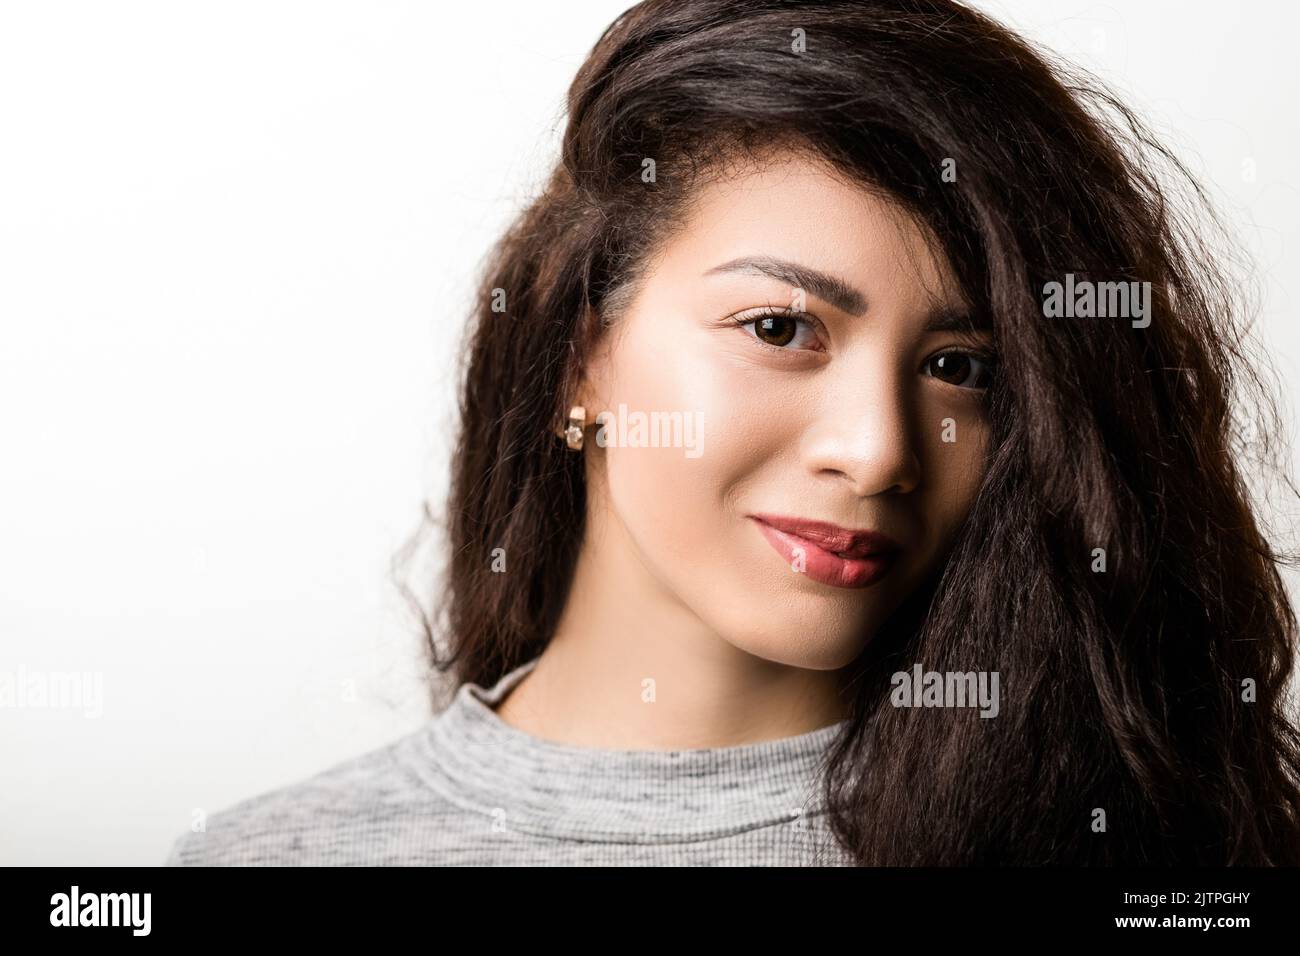 woman youth natural beauty skin health care Stock Photo